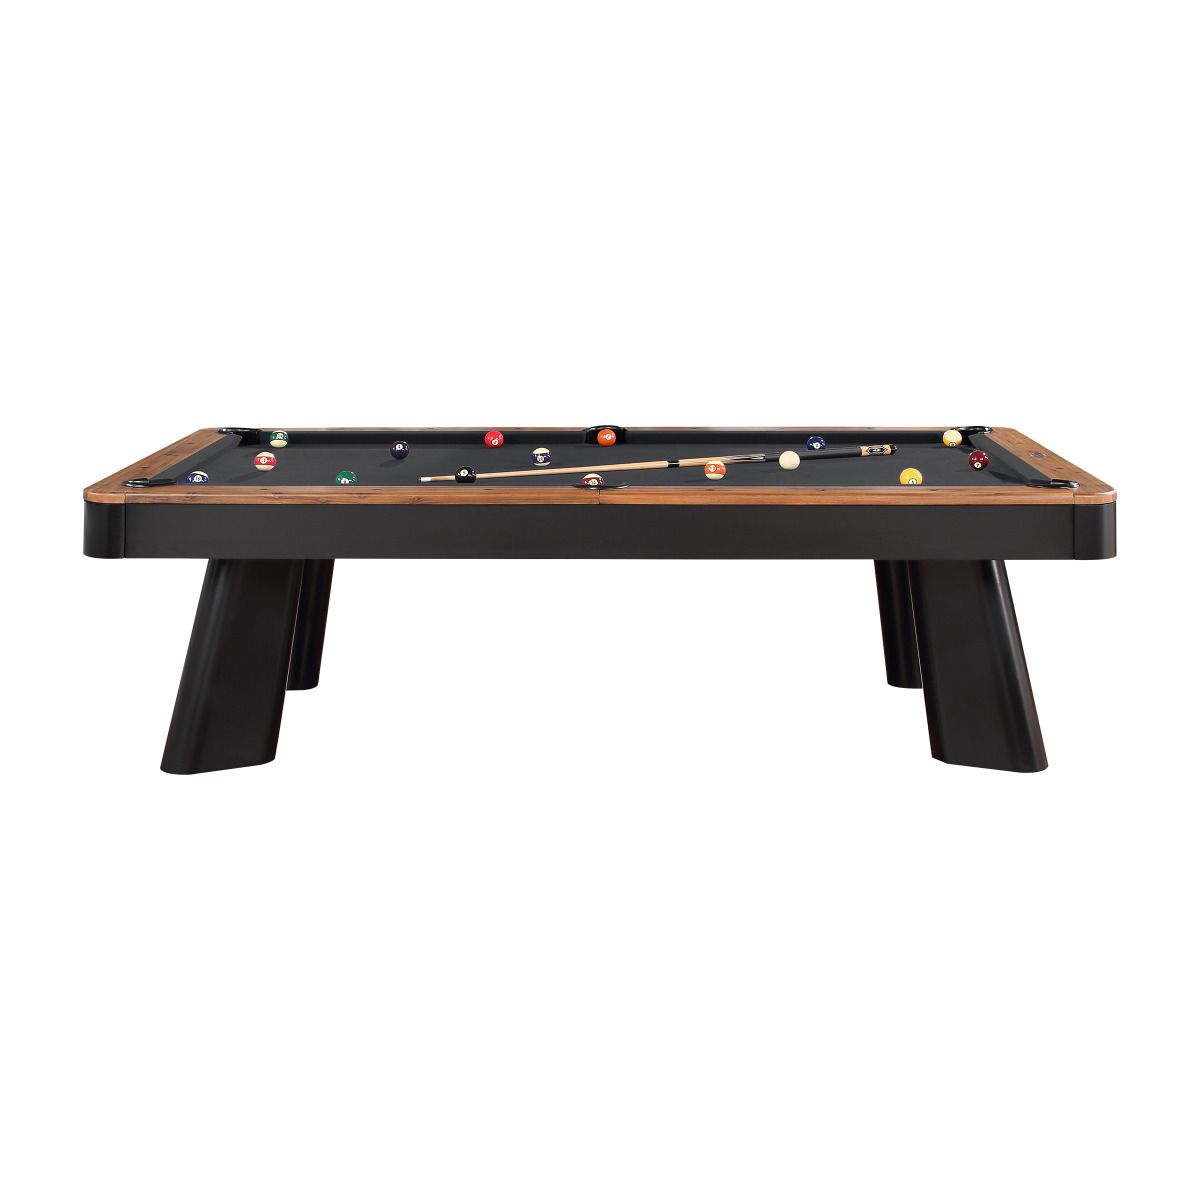 The Nouveau pool table by Imperial